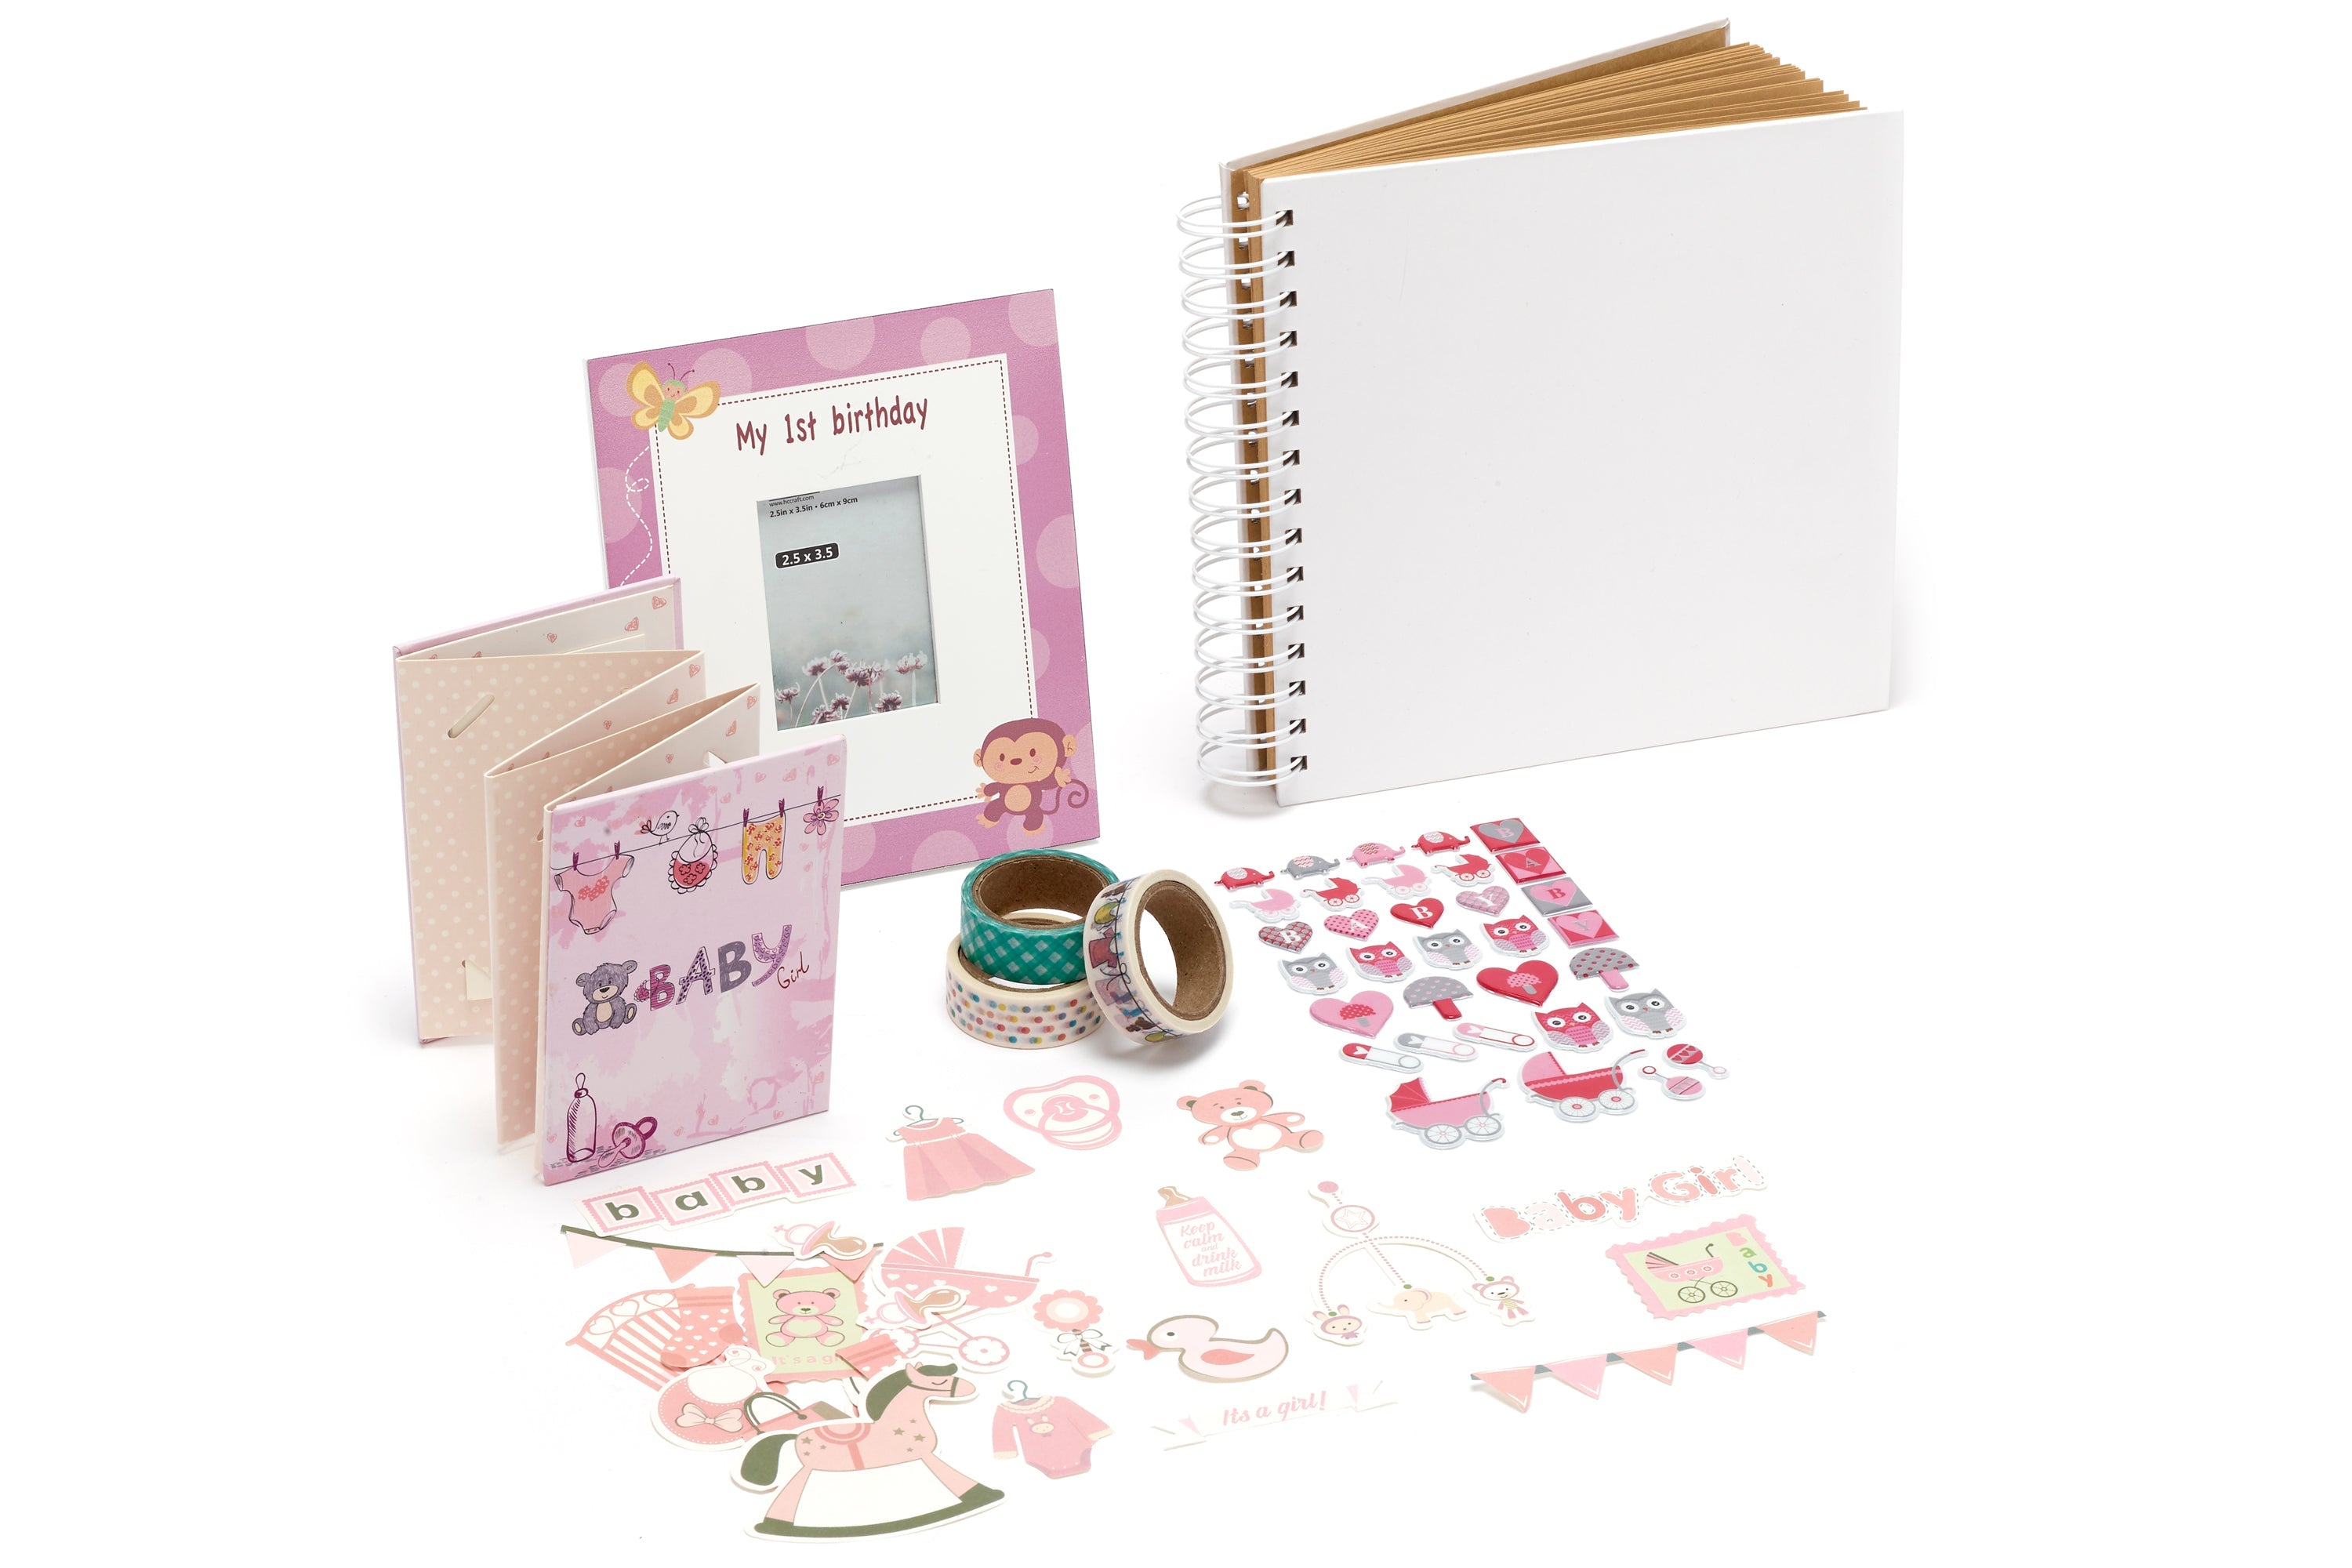 Fujifilm Instax Baby Girl 1st Year Bundle Accessory Pack for Mini Prints - Pink - maplin.co.uk